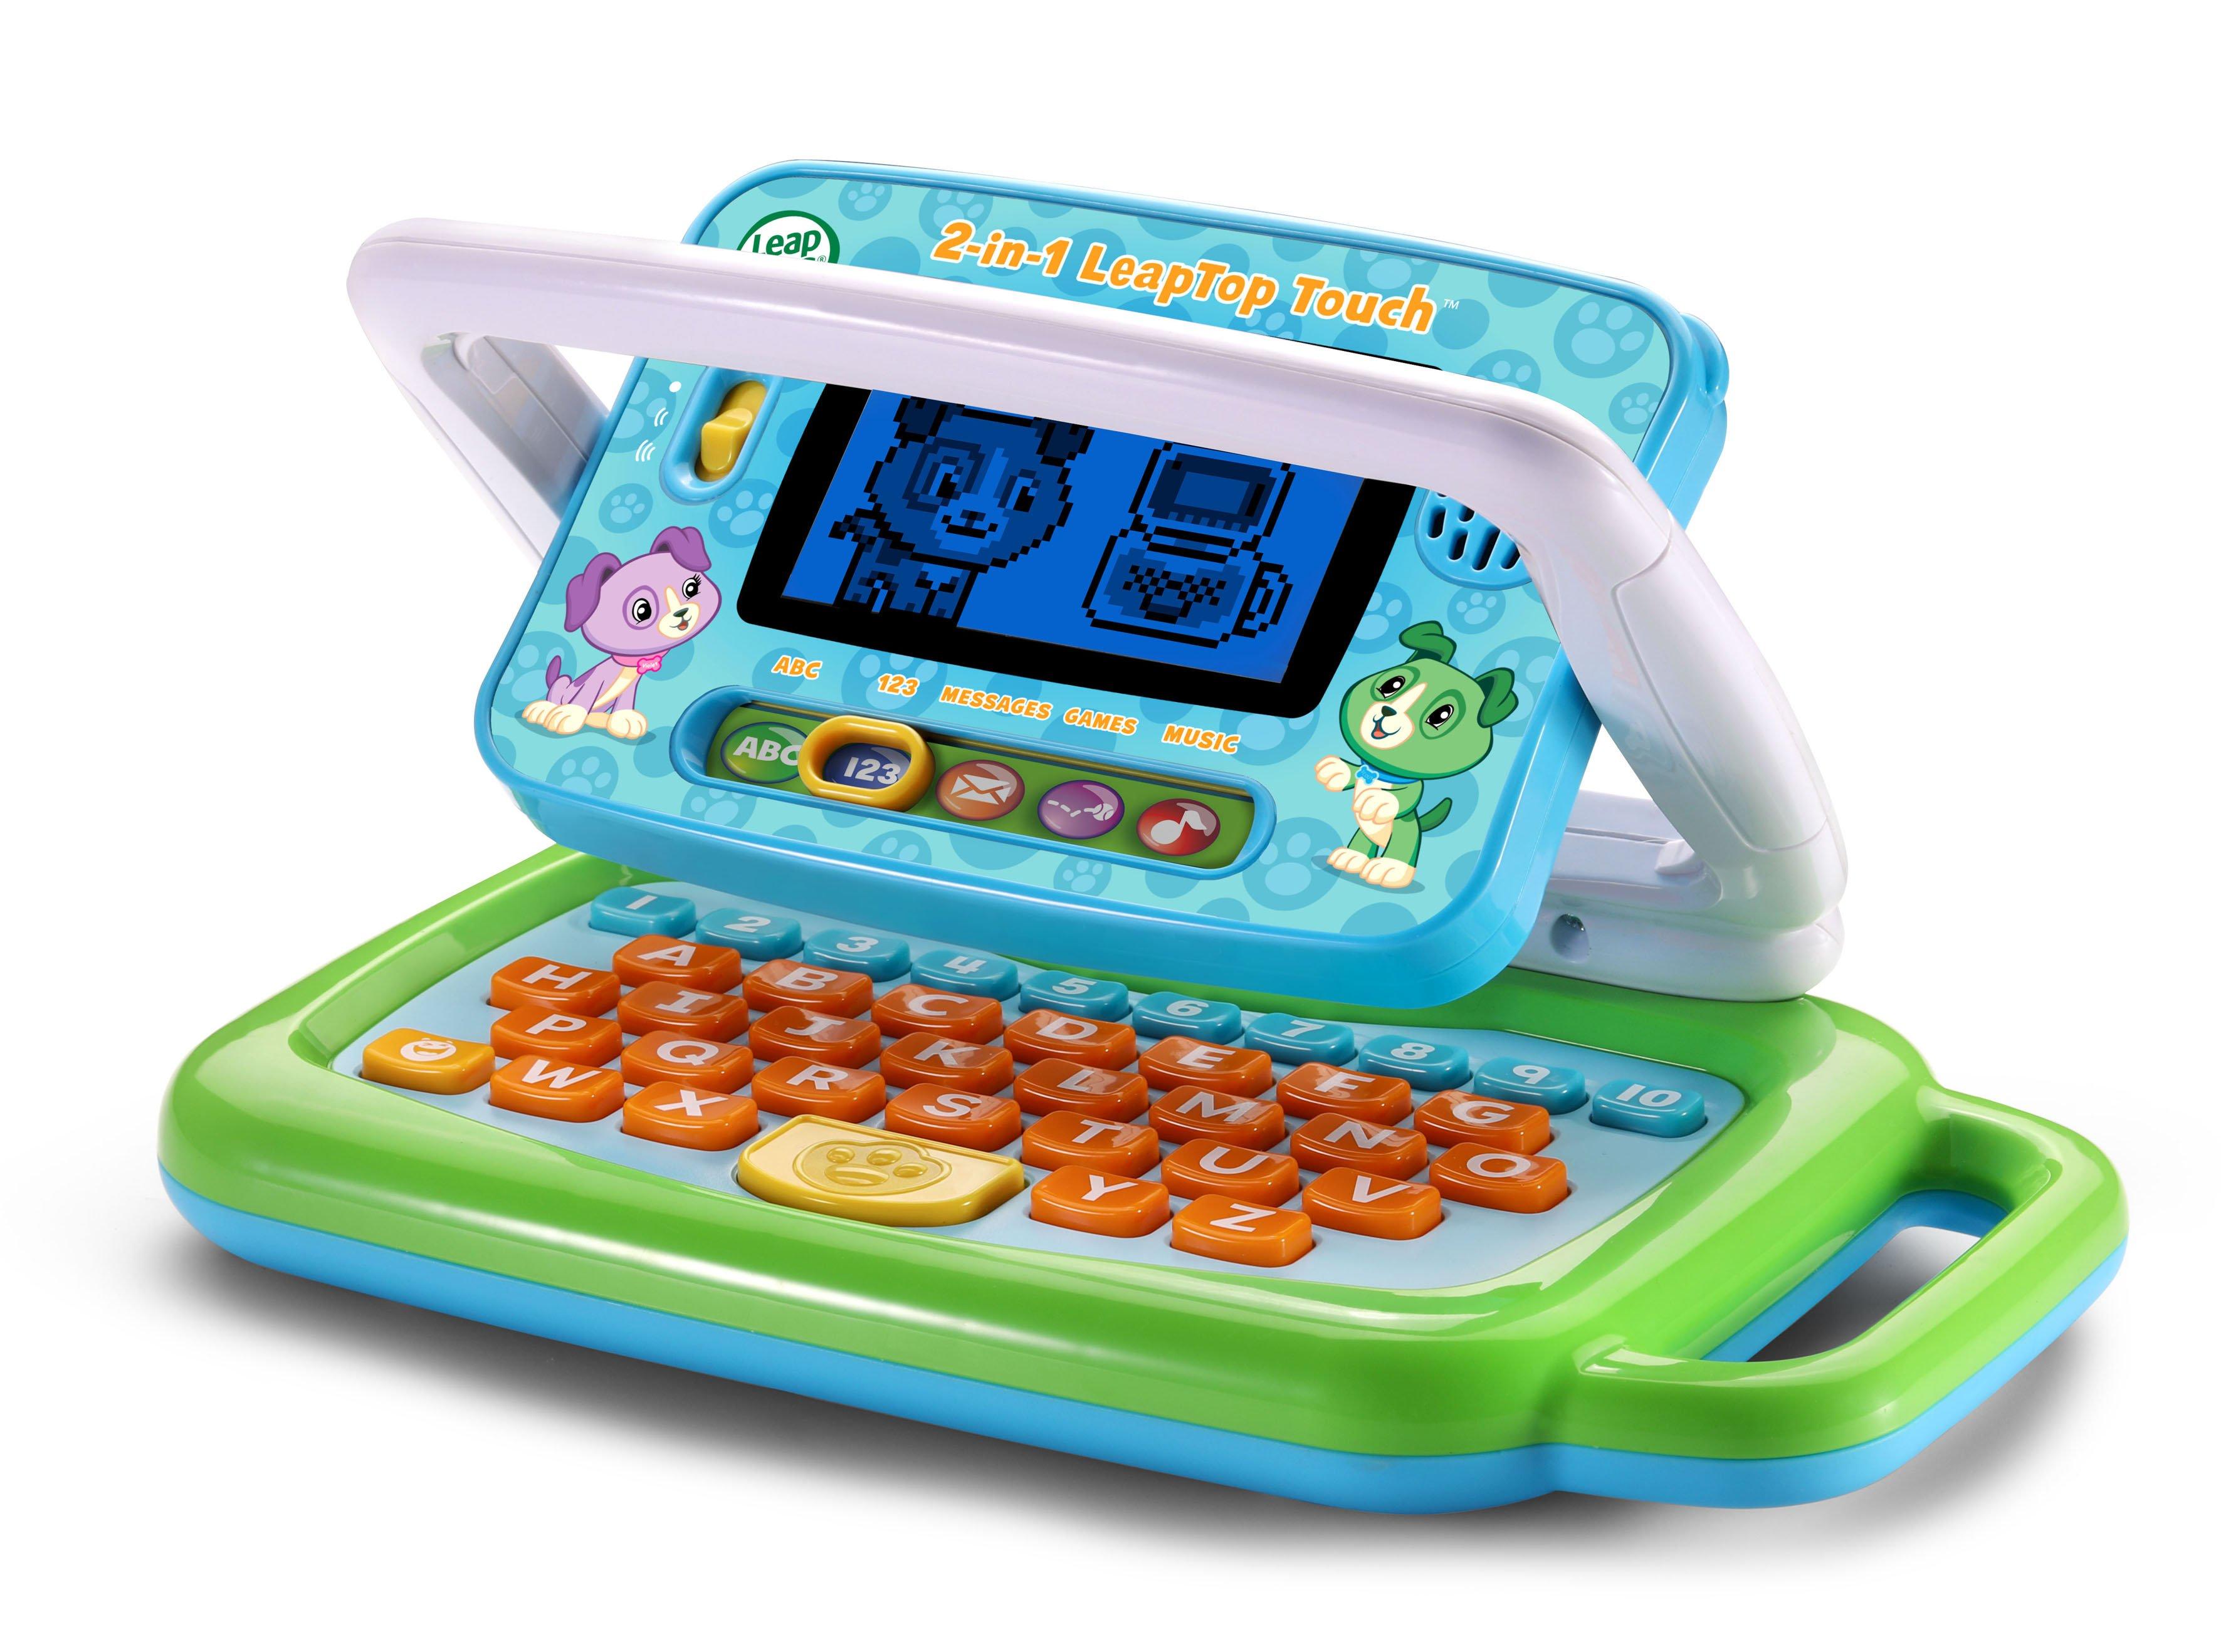 80-600900 for sale online LeapFrog 2-in-1 LeapTop Touch 